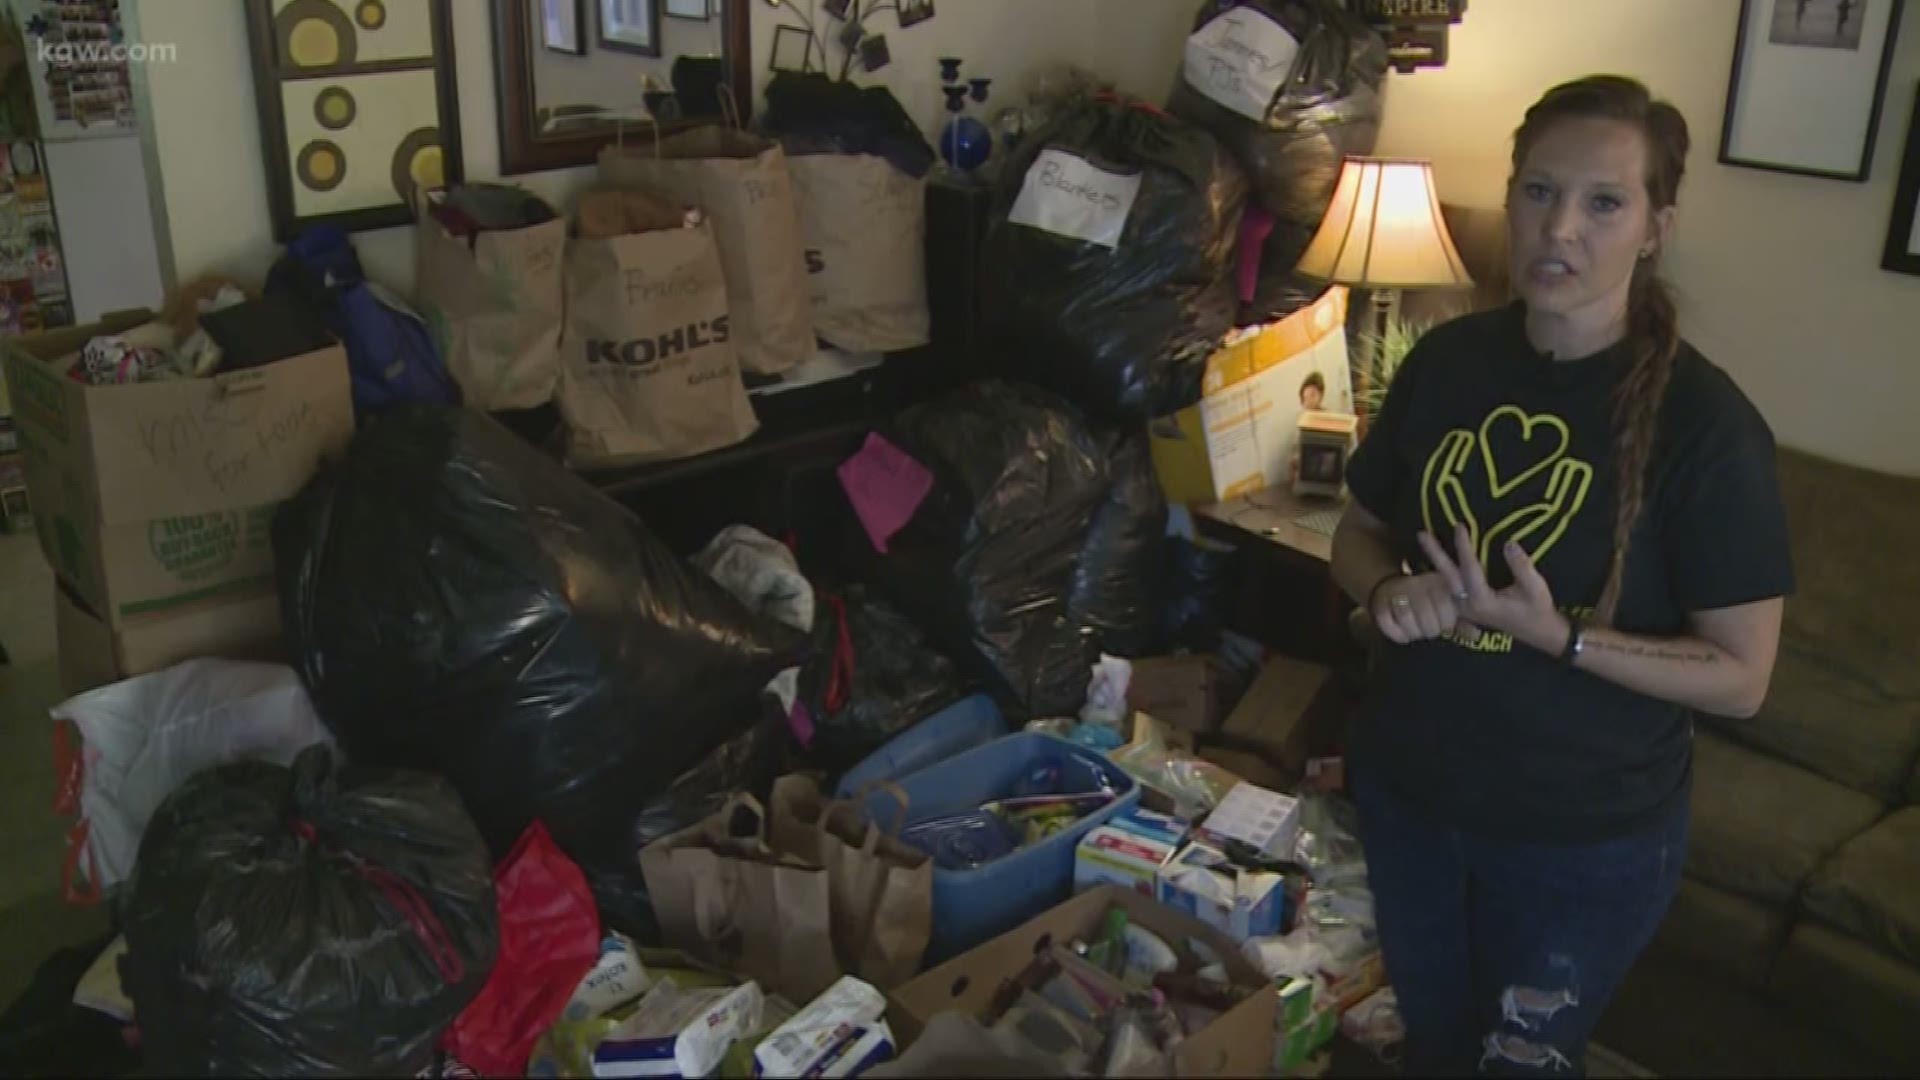 A local woman has gone above and beyond to help the homeless with donations.